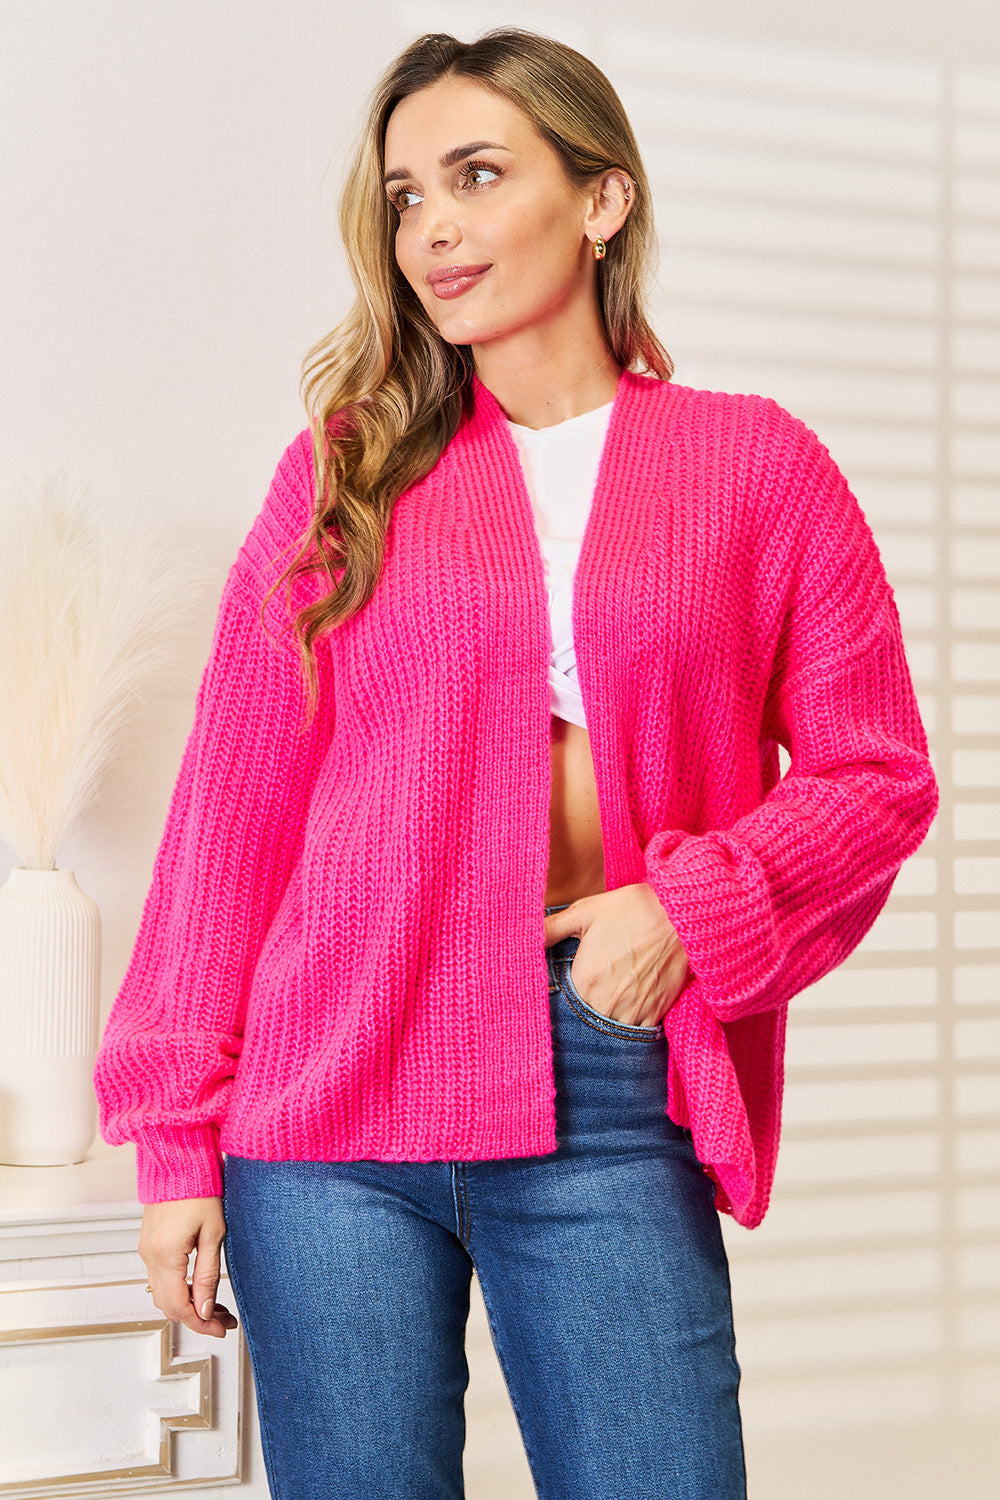 Woven Right Rib-Knit Open Front Drop Shoulder Cardigan - Ryzela